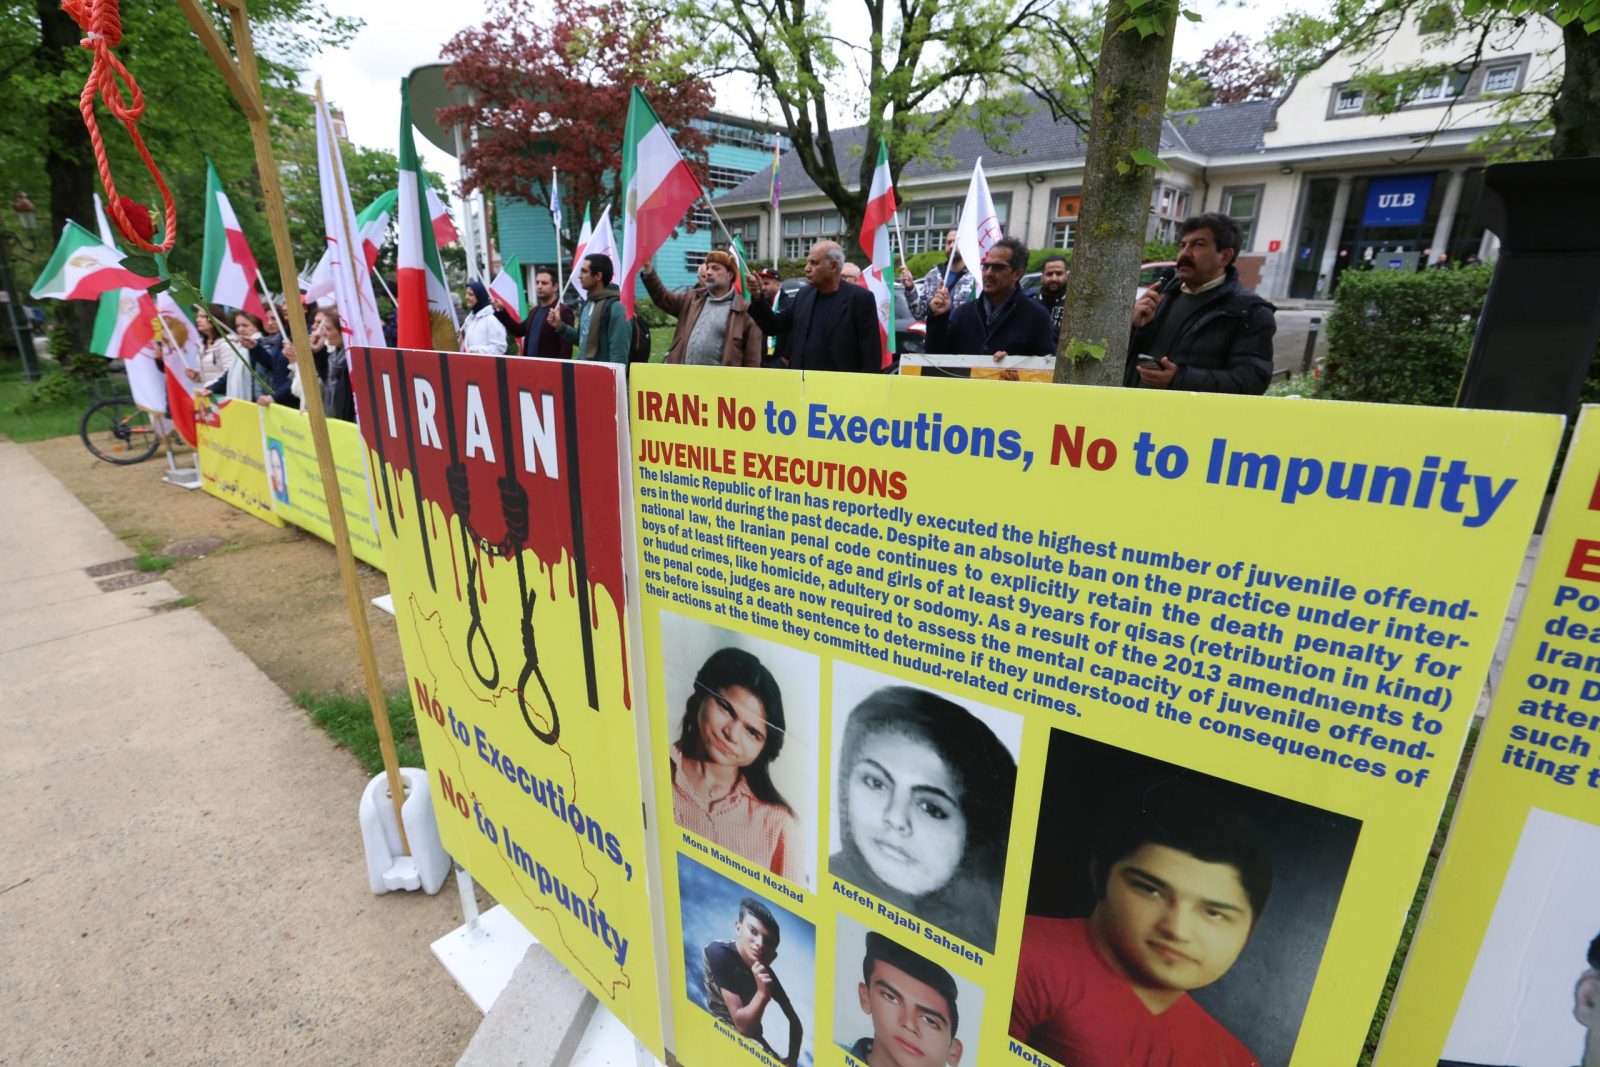 epa10623181 Representatives of opposition group the National Council of Resistance of Iran (NCRI) stand near a placard against executions in Iran during a protest in front of Iranian embassy in Brussels, Belgium, 12 May 2023. According to the NCRI, the protesters are demanding the closure of the Iranian embassy.  EPA/OLIVIER HOSLET